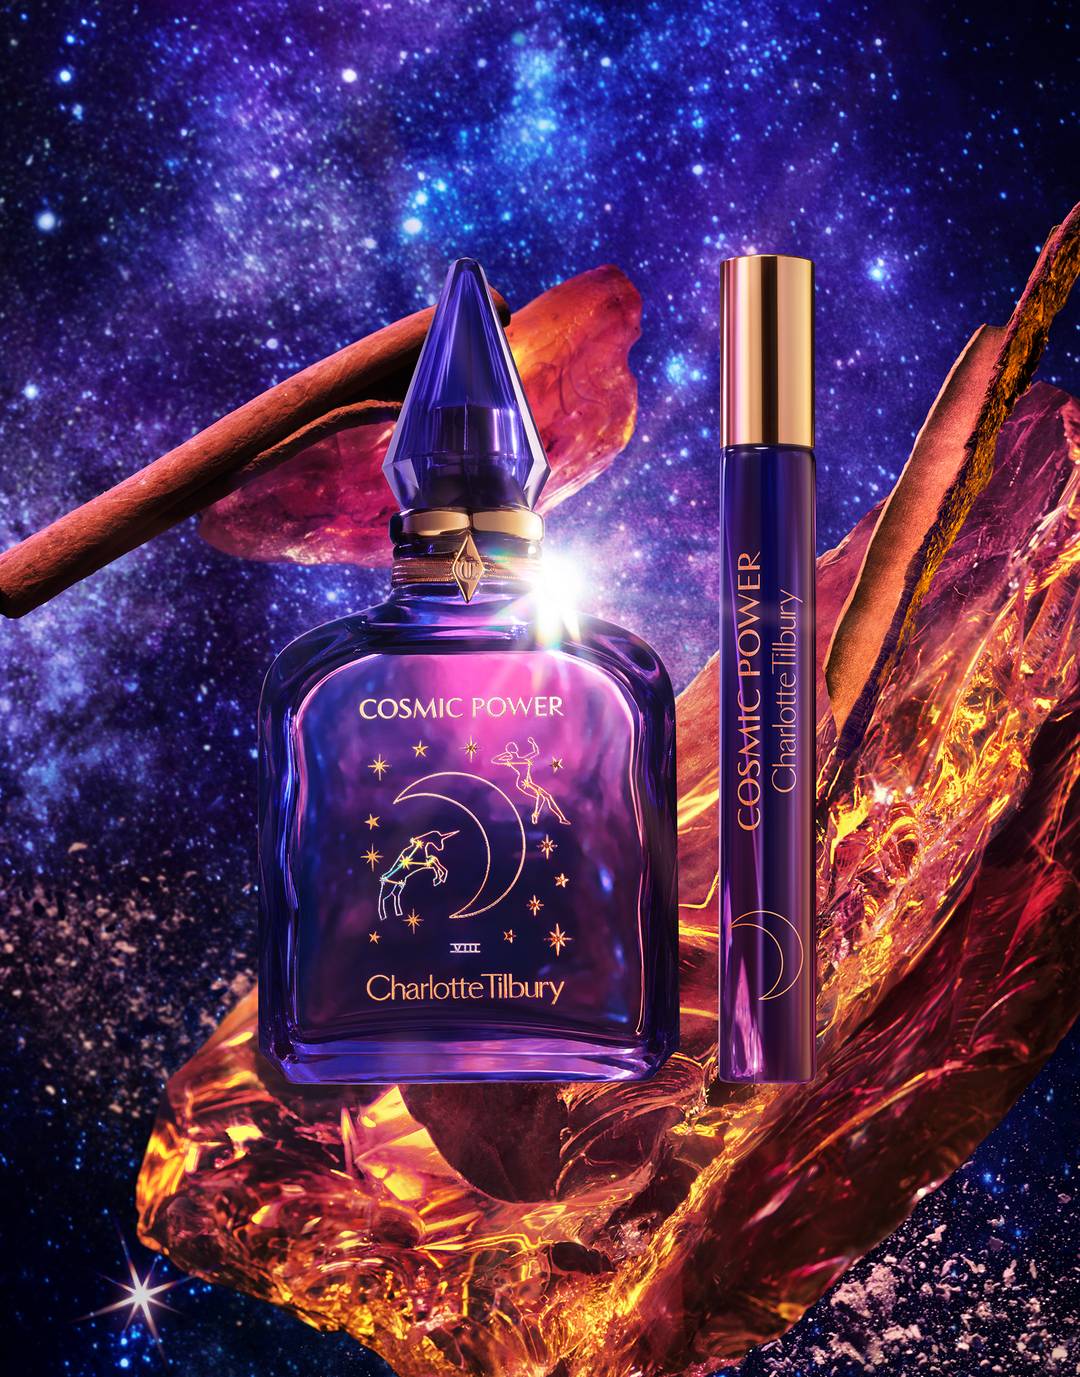 Charlotte Tilbury Fragrance Collection of Emotions - Cosmic Power